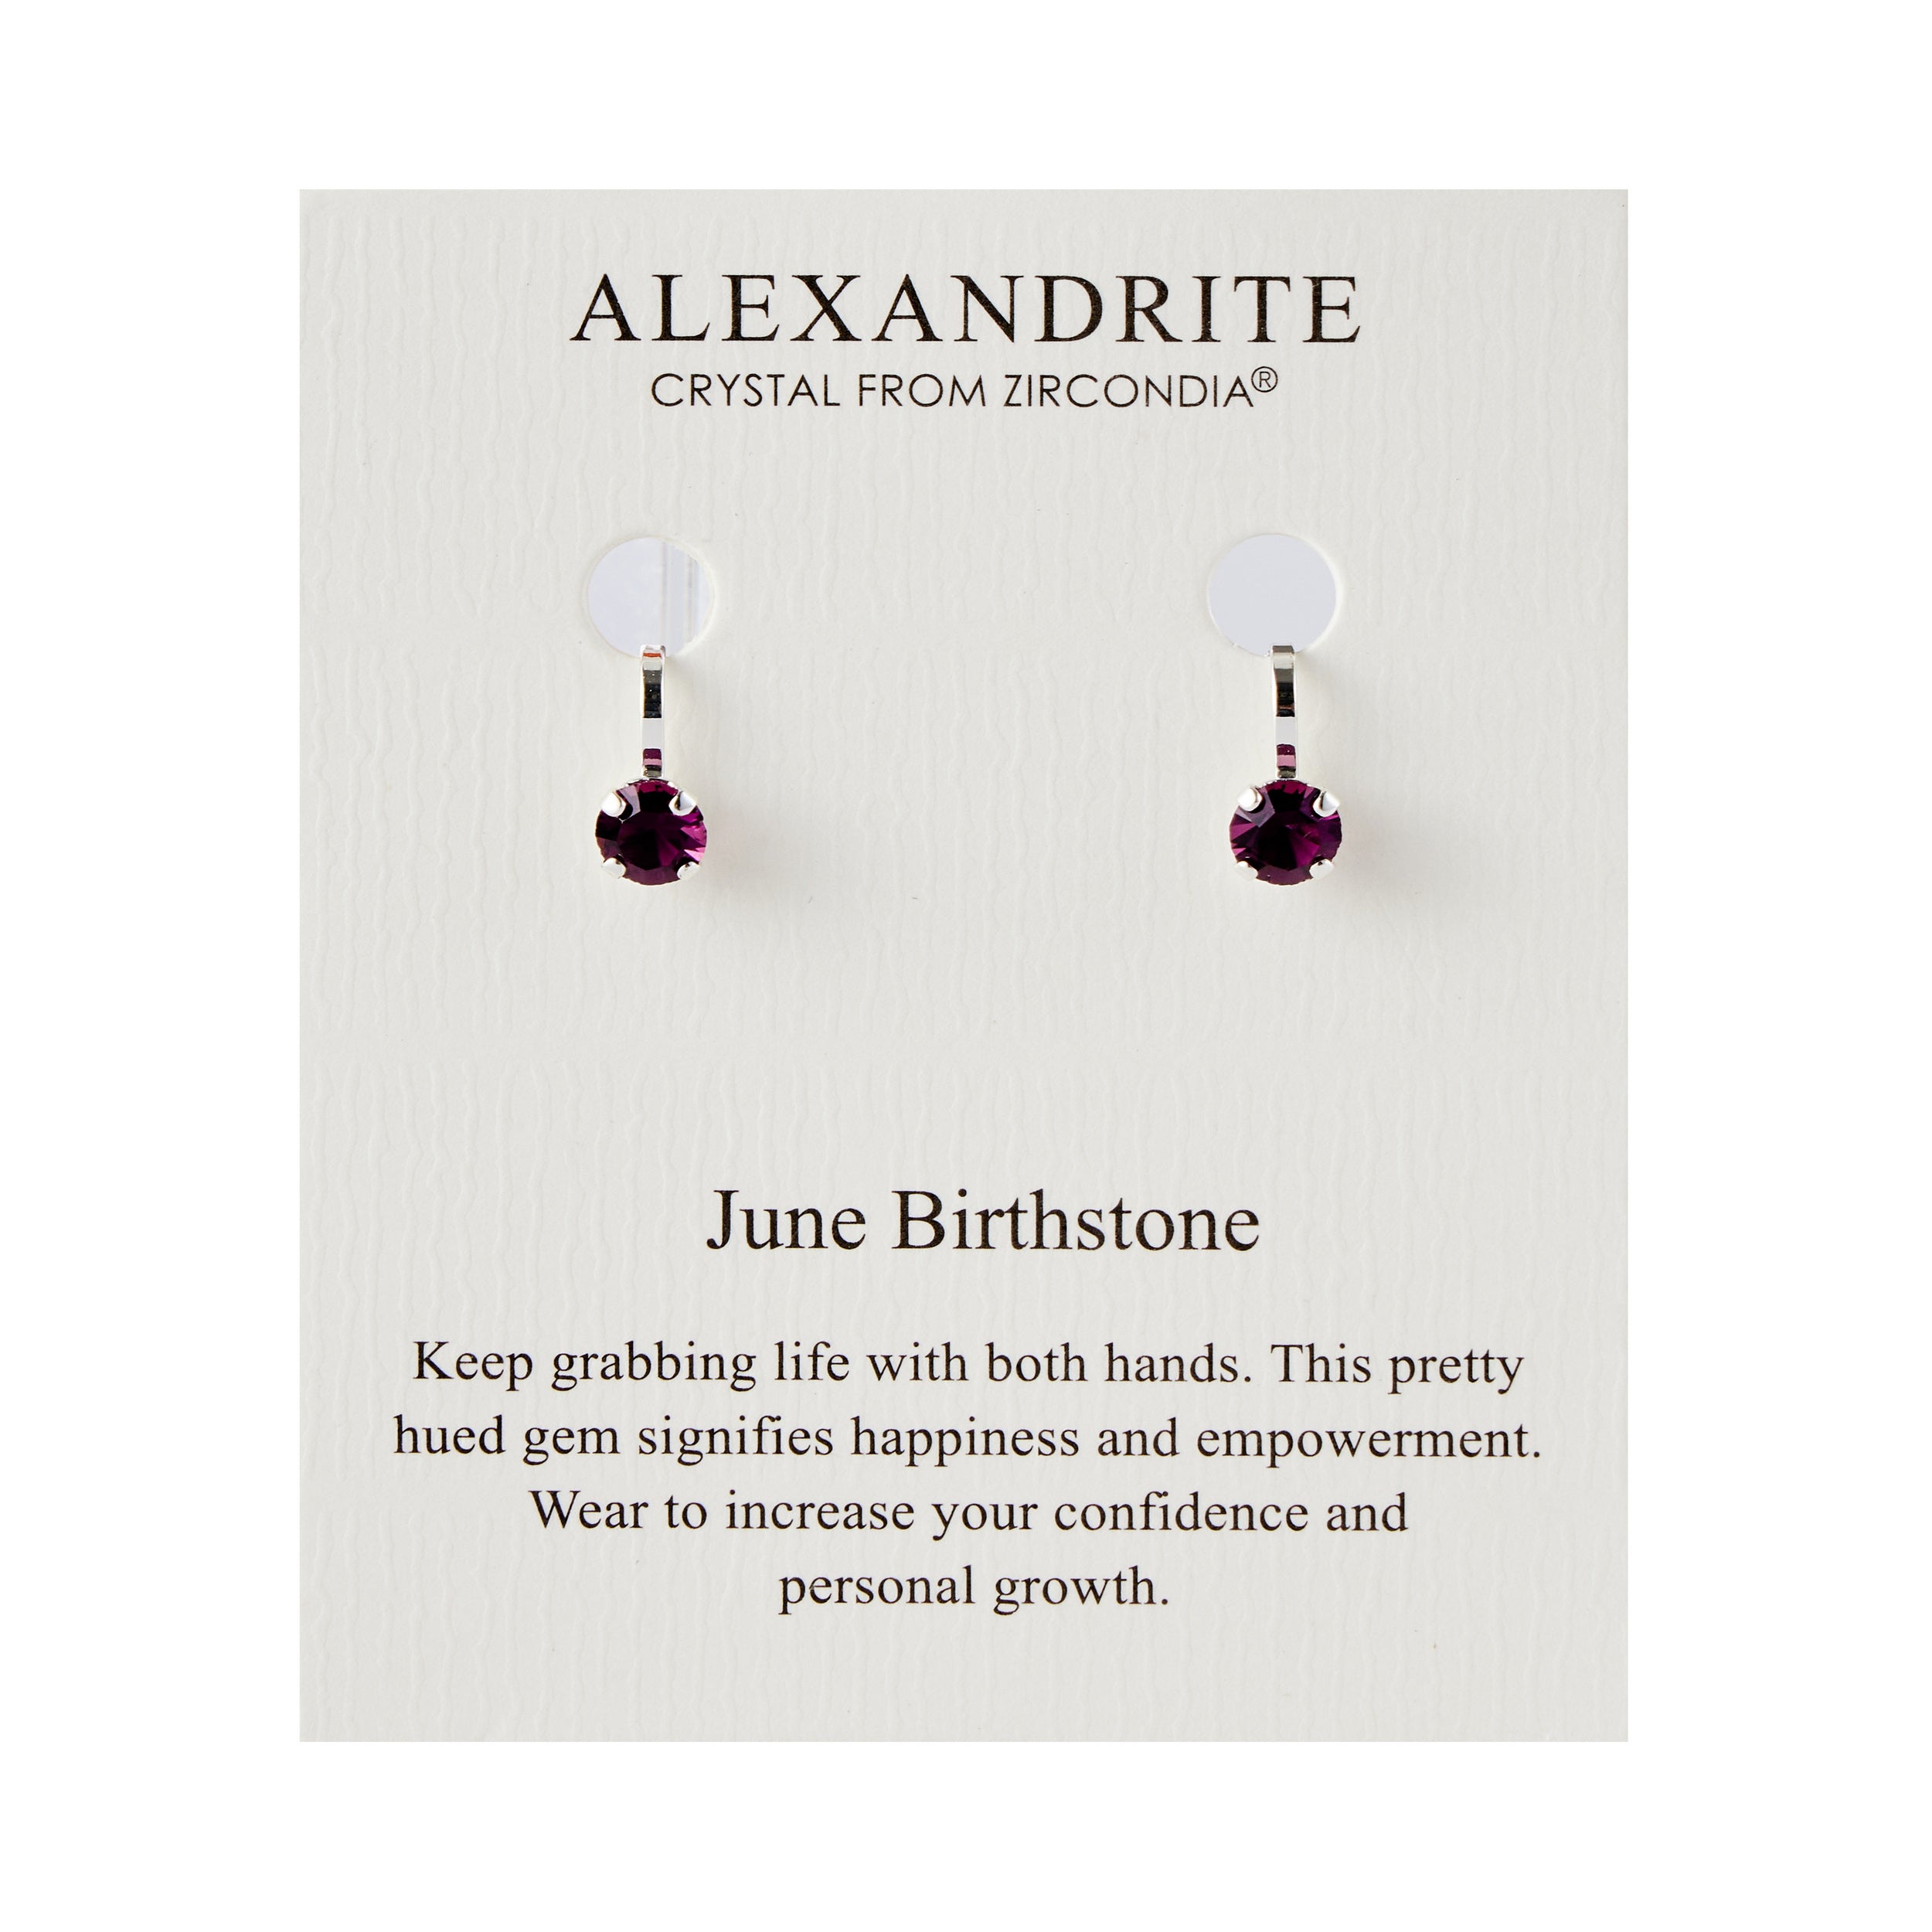 June (Alexandrite) Birthstone Clip On Earrings Created with Zircondia® Crystals